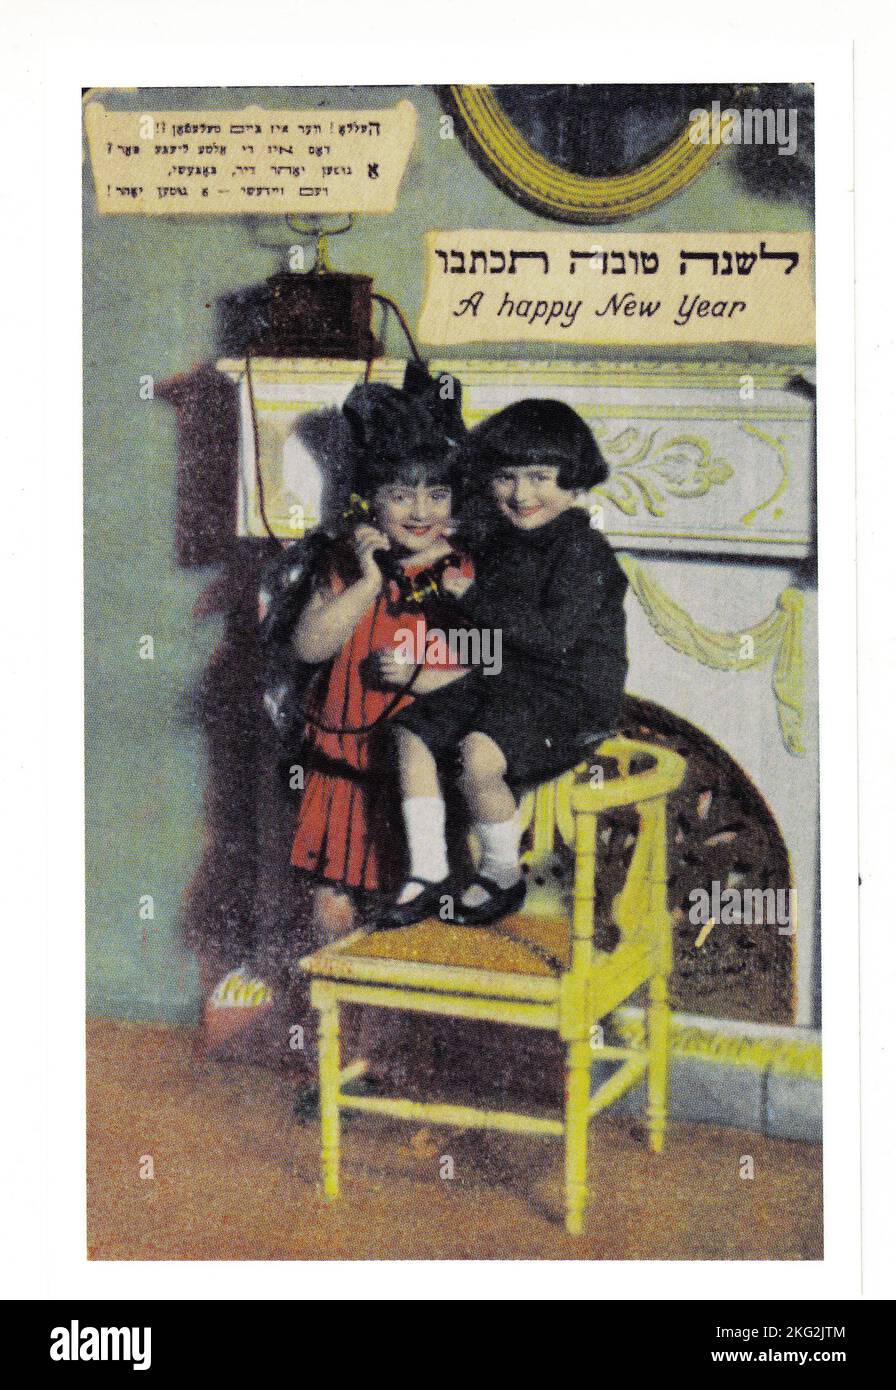 An early 20th century Jewish New Years card primarily in Yiddish but also with Hebrew & English writing. It depicts two young children extending their greetings on an old fashioned telephone, a relatively new invention for the home. Stock Photo